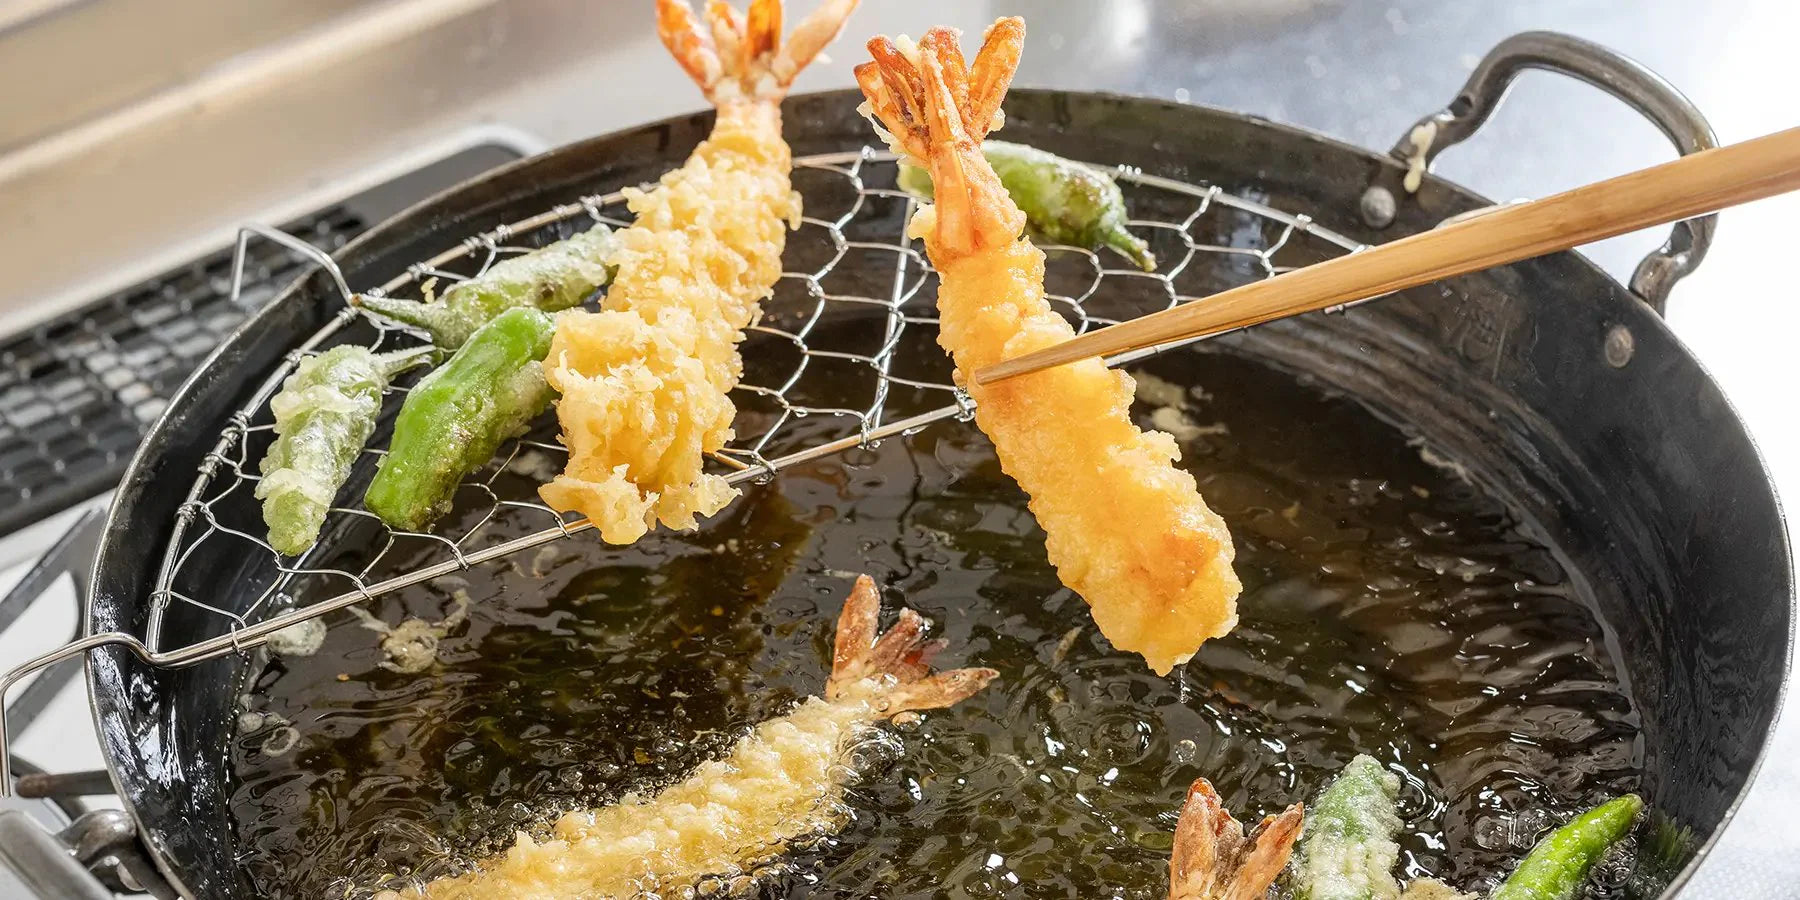 Discover our great selection of Tempura supplies